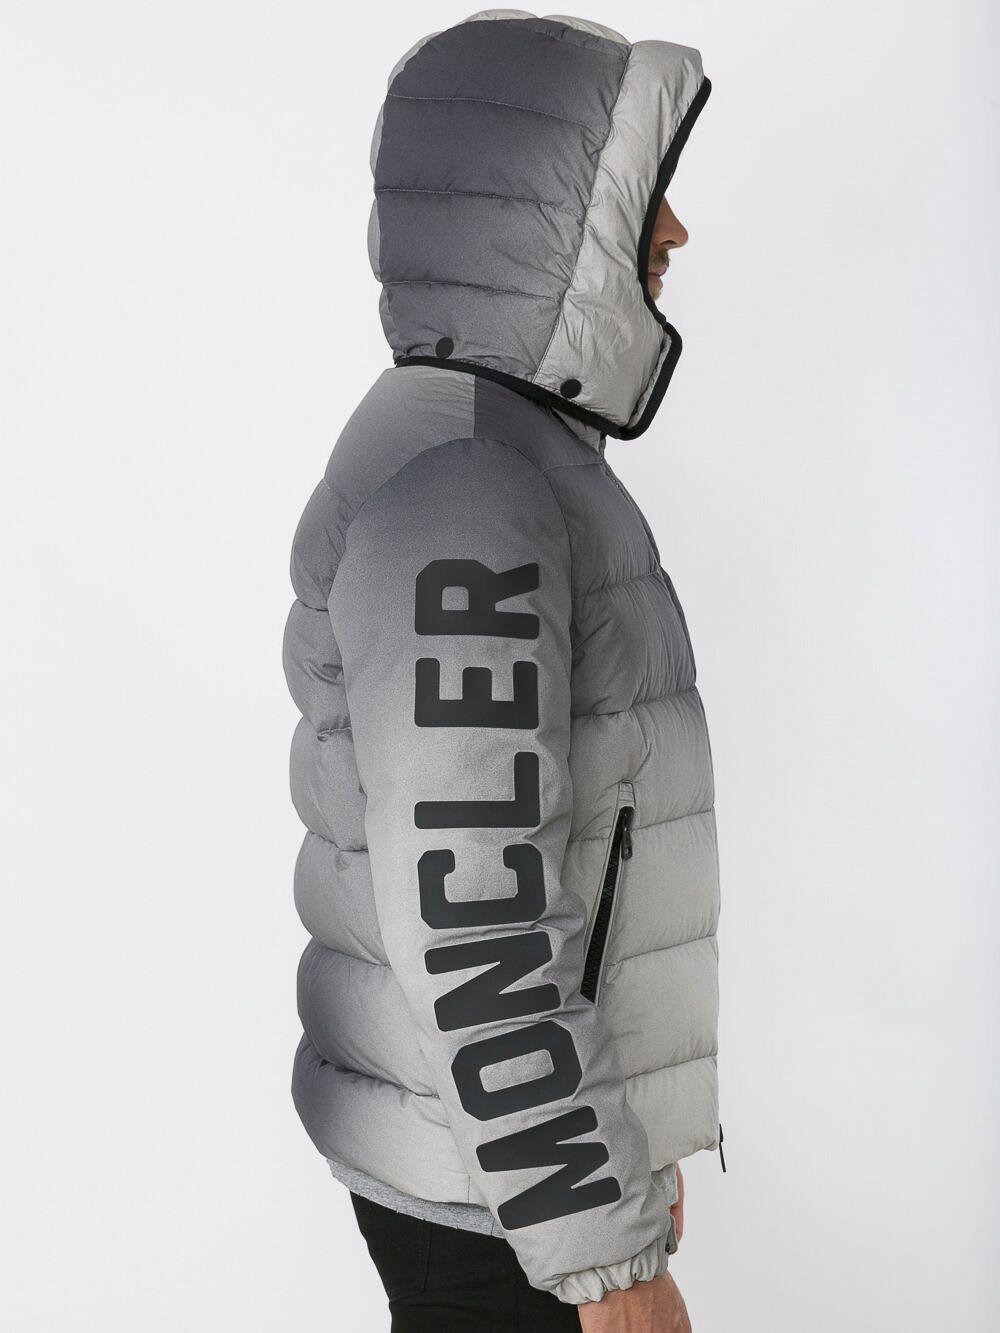 Moncler Cotton X Off-white 'enclos' Padded Jacket in Blue for Men - Lyst